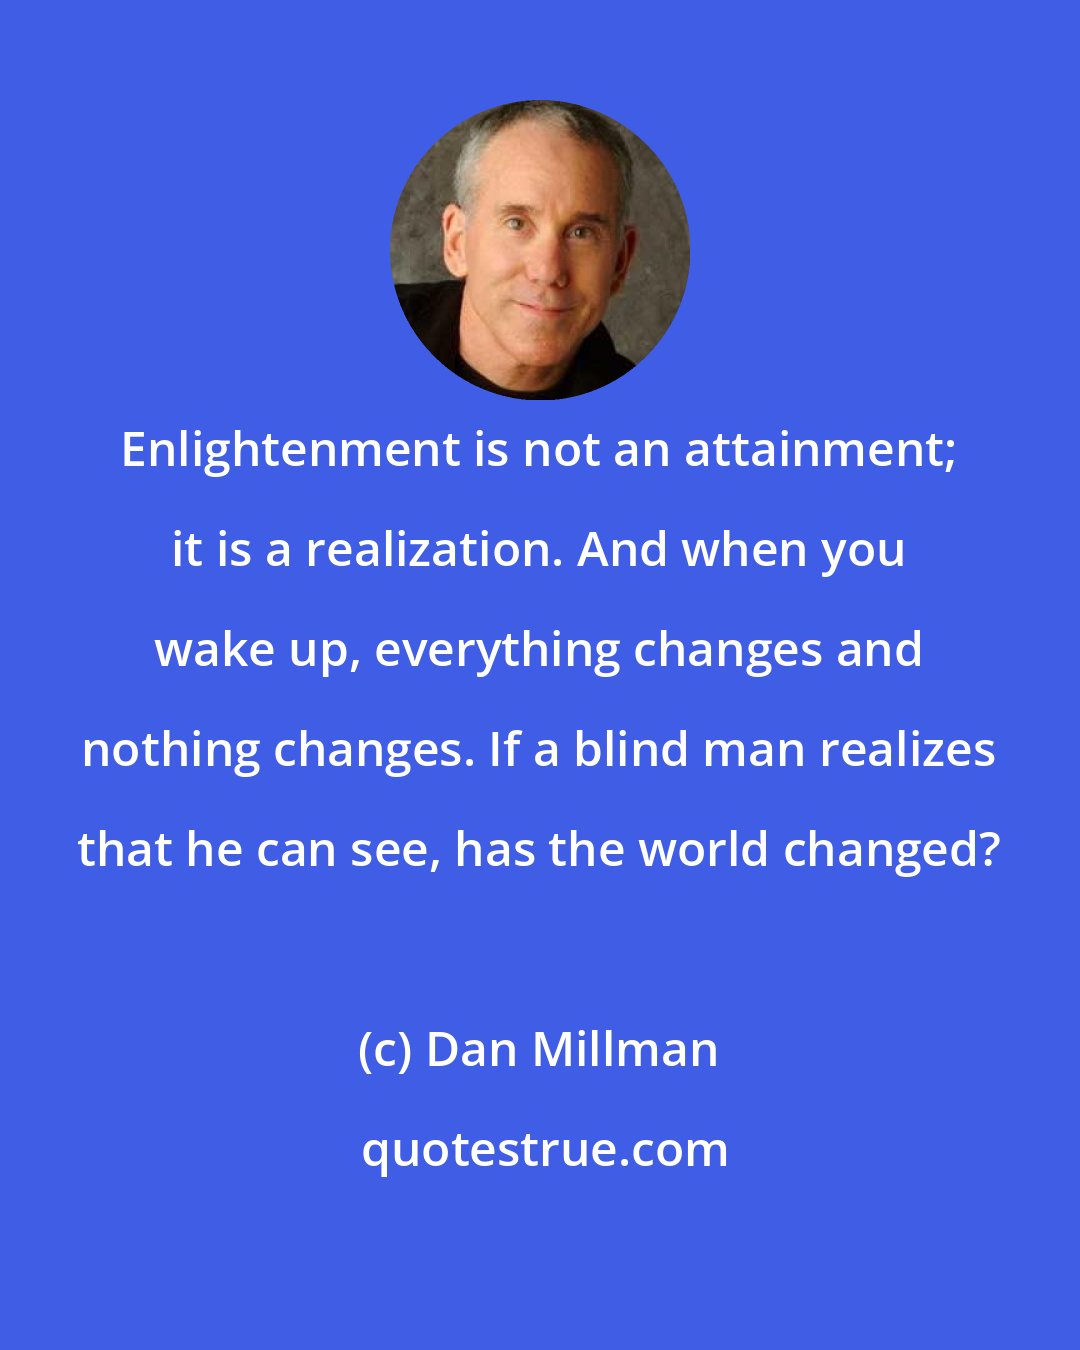 Dan Millman: Enlightenment is not an attainment; it is a realization. And when you wake up, everything changes and nothing changes. If a blind man realizes that he can see, has the world changed?